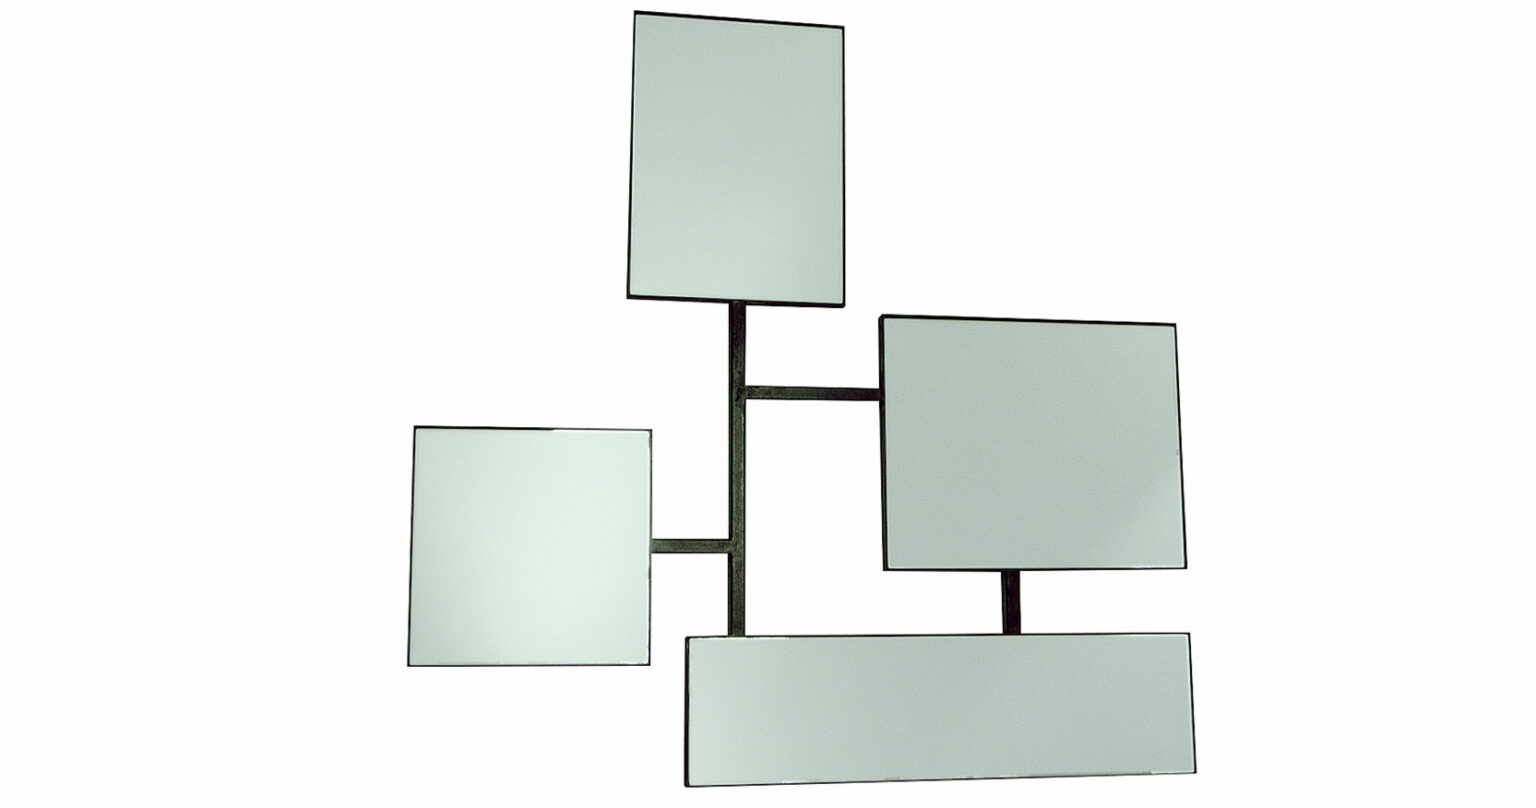 Elizabeth Garouste, minimalist brown wrought iron mirror constisting of 4 separate mirrors with rectangular and square frames, surrounded by wrought iron frames all connected by brown wrought iron stems